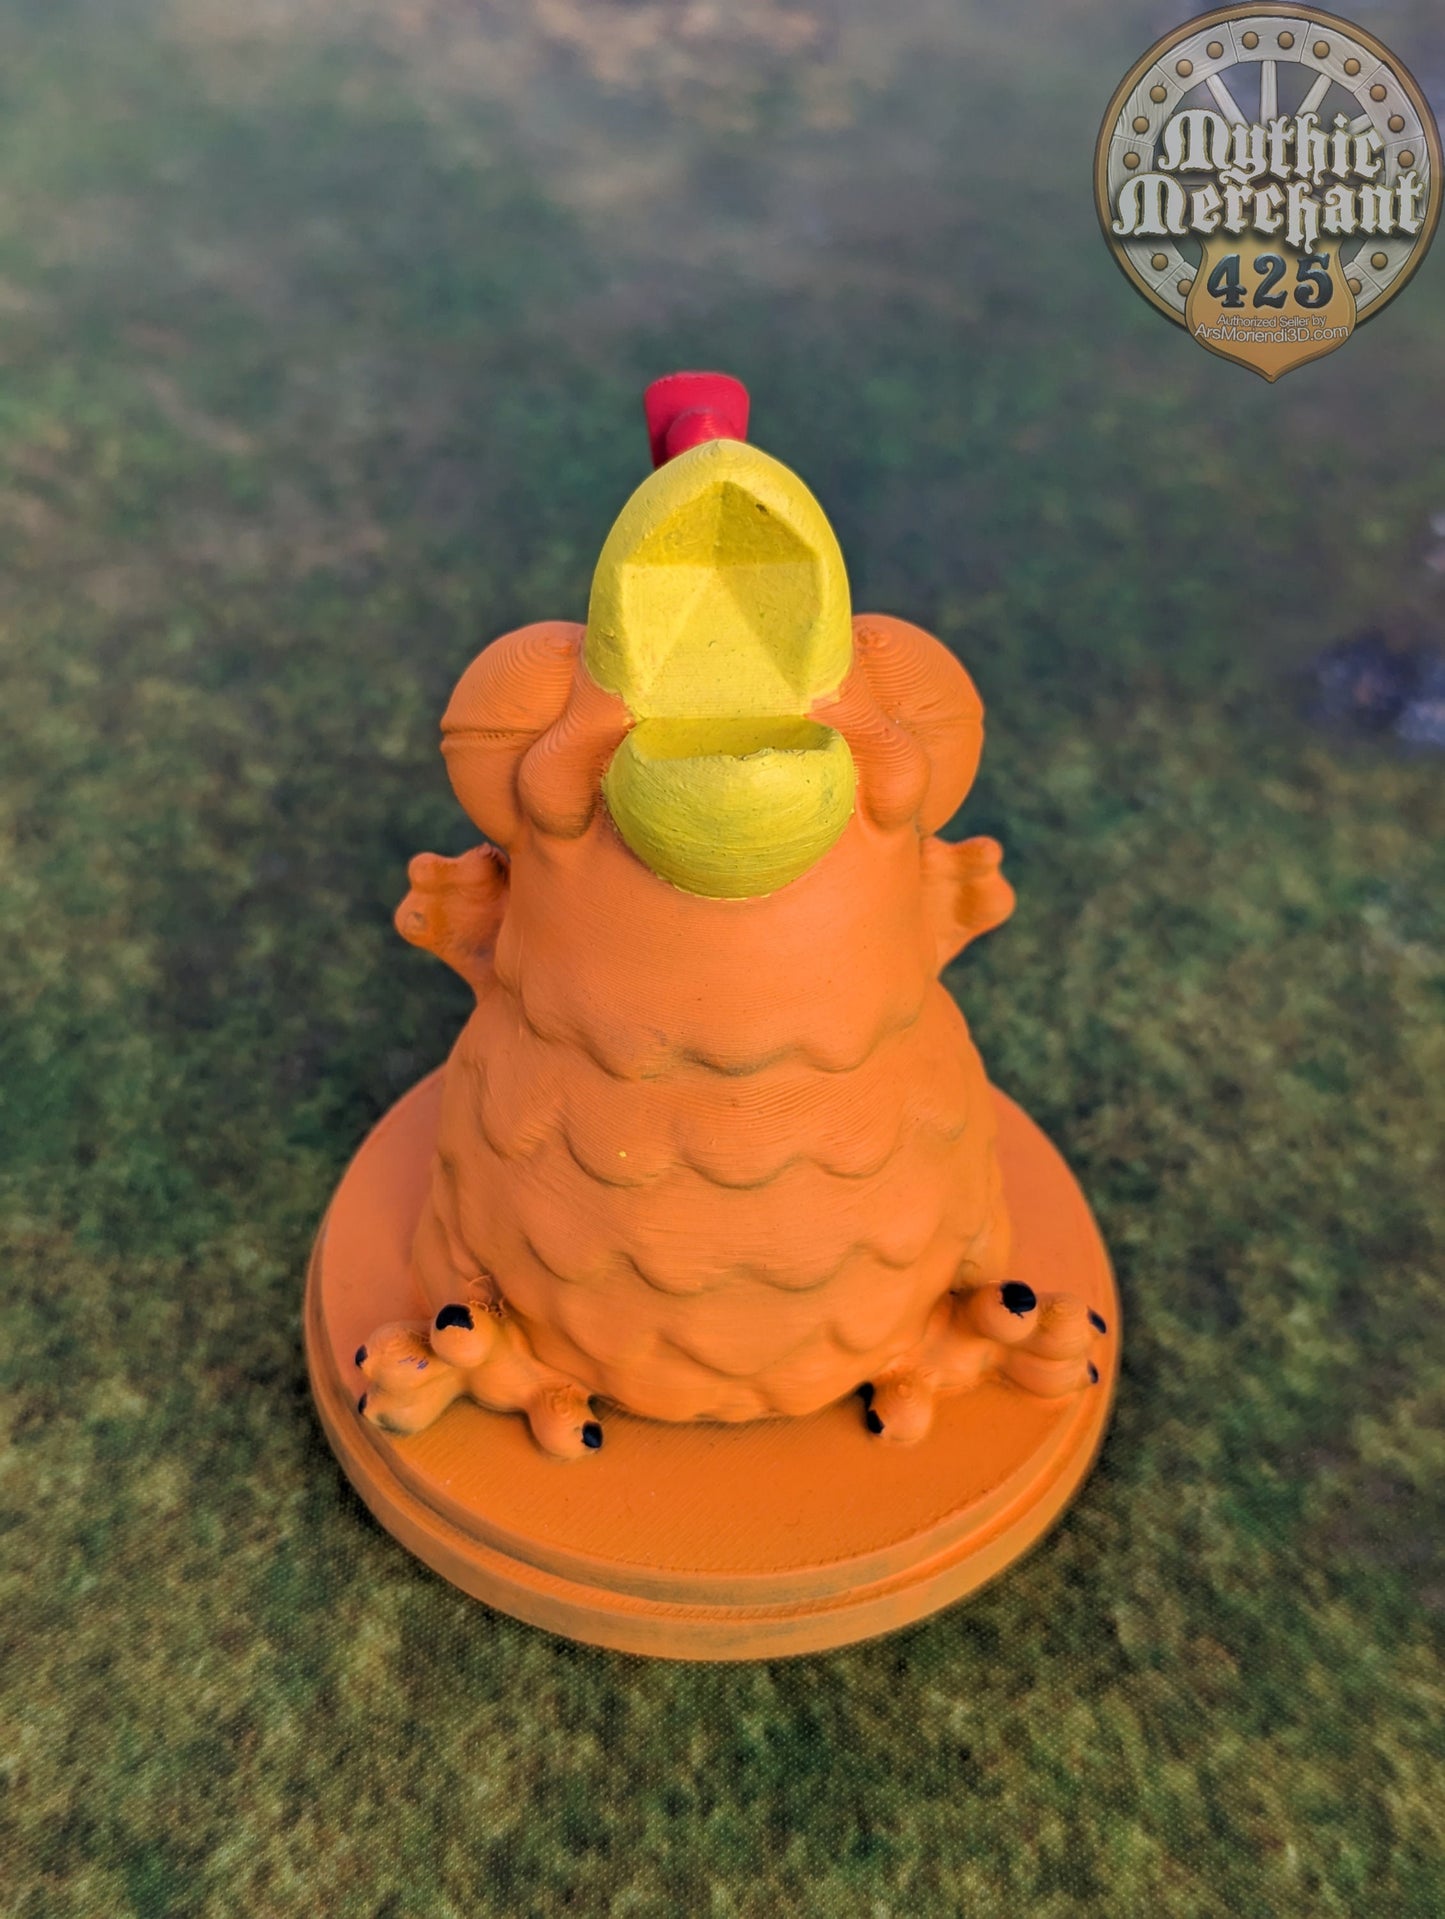 Baby Phoenix Toy 3D Printed Dice Guardian - Dice Jail | RPG Dice Vault | D20 Box | Player Unique Gift - Playful Dice Holder!